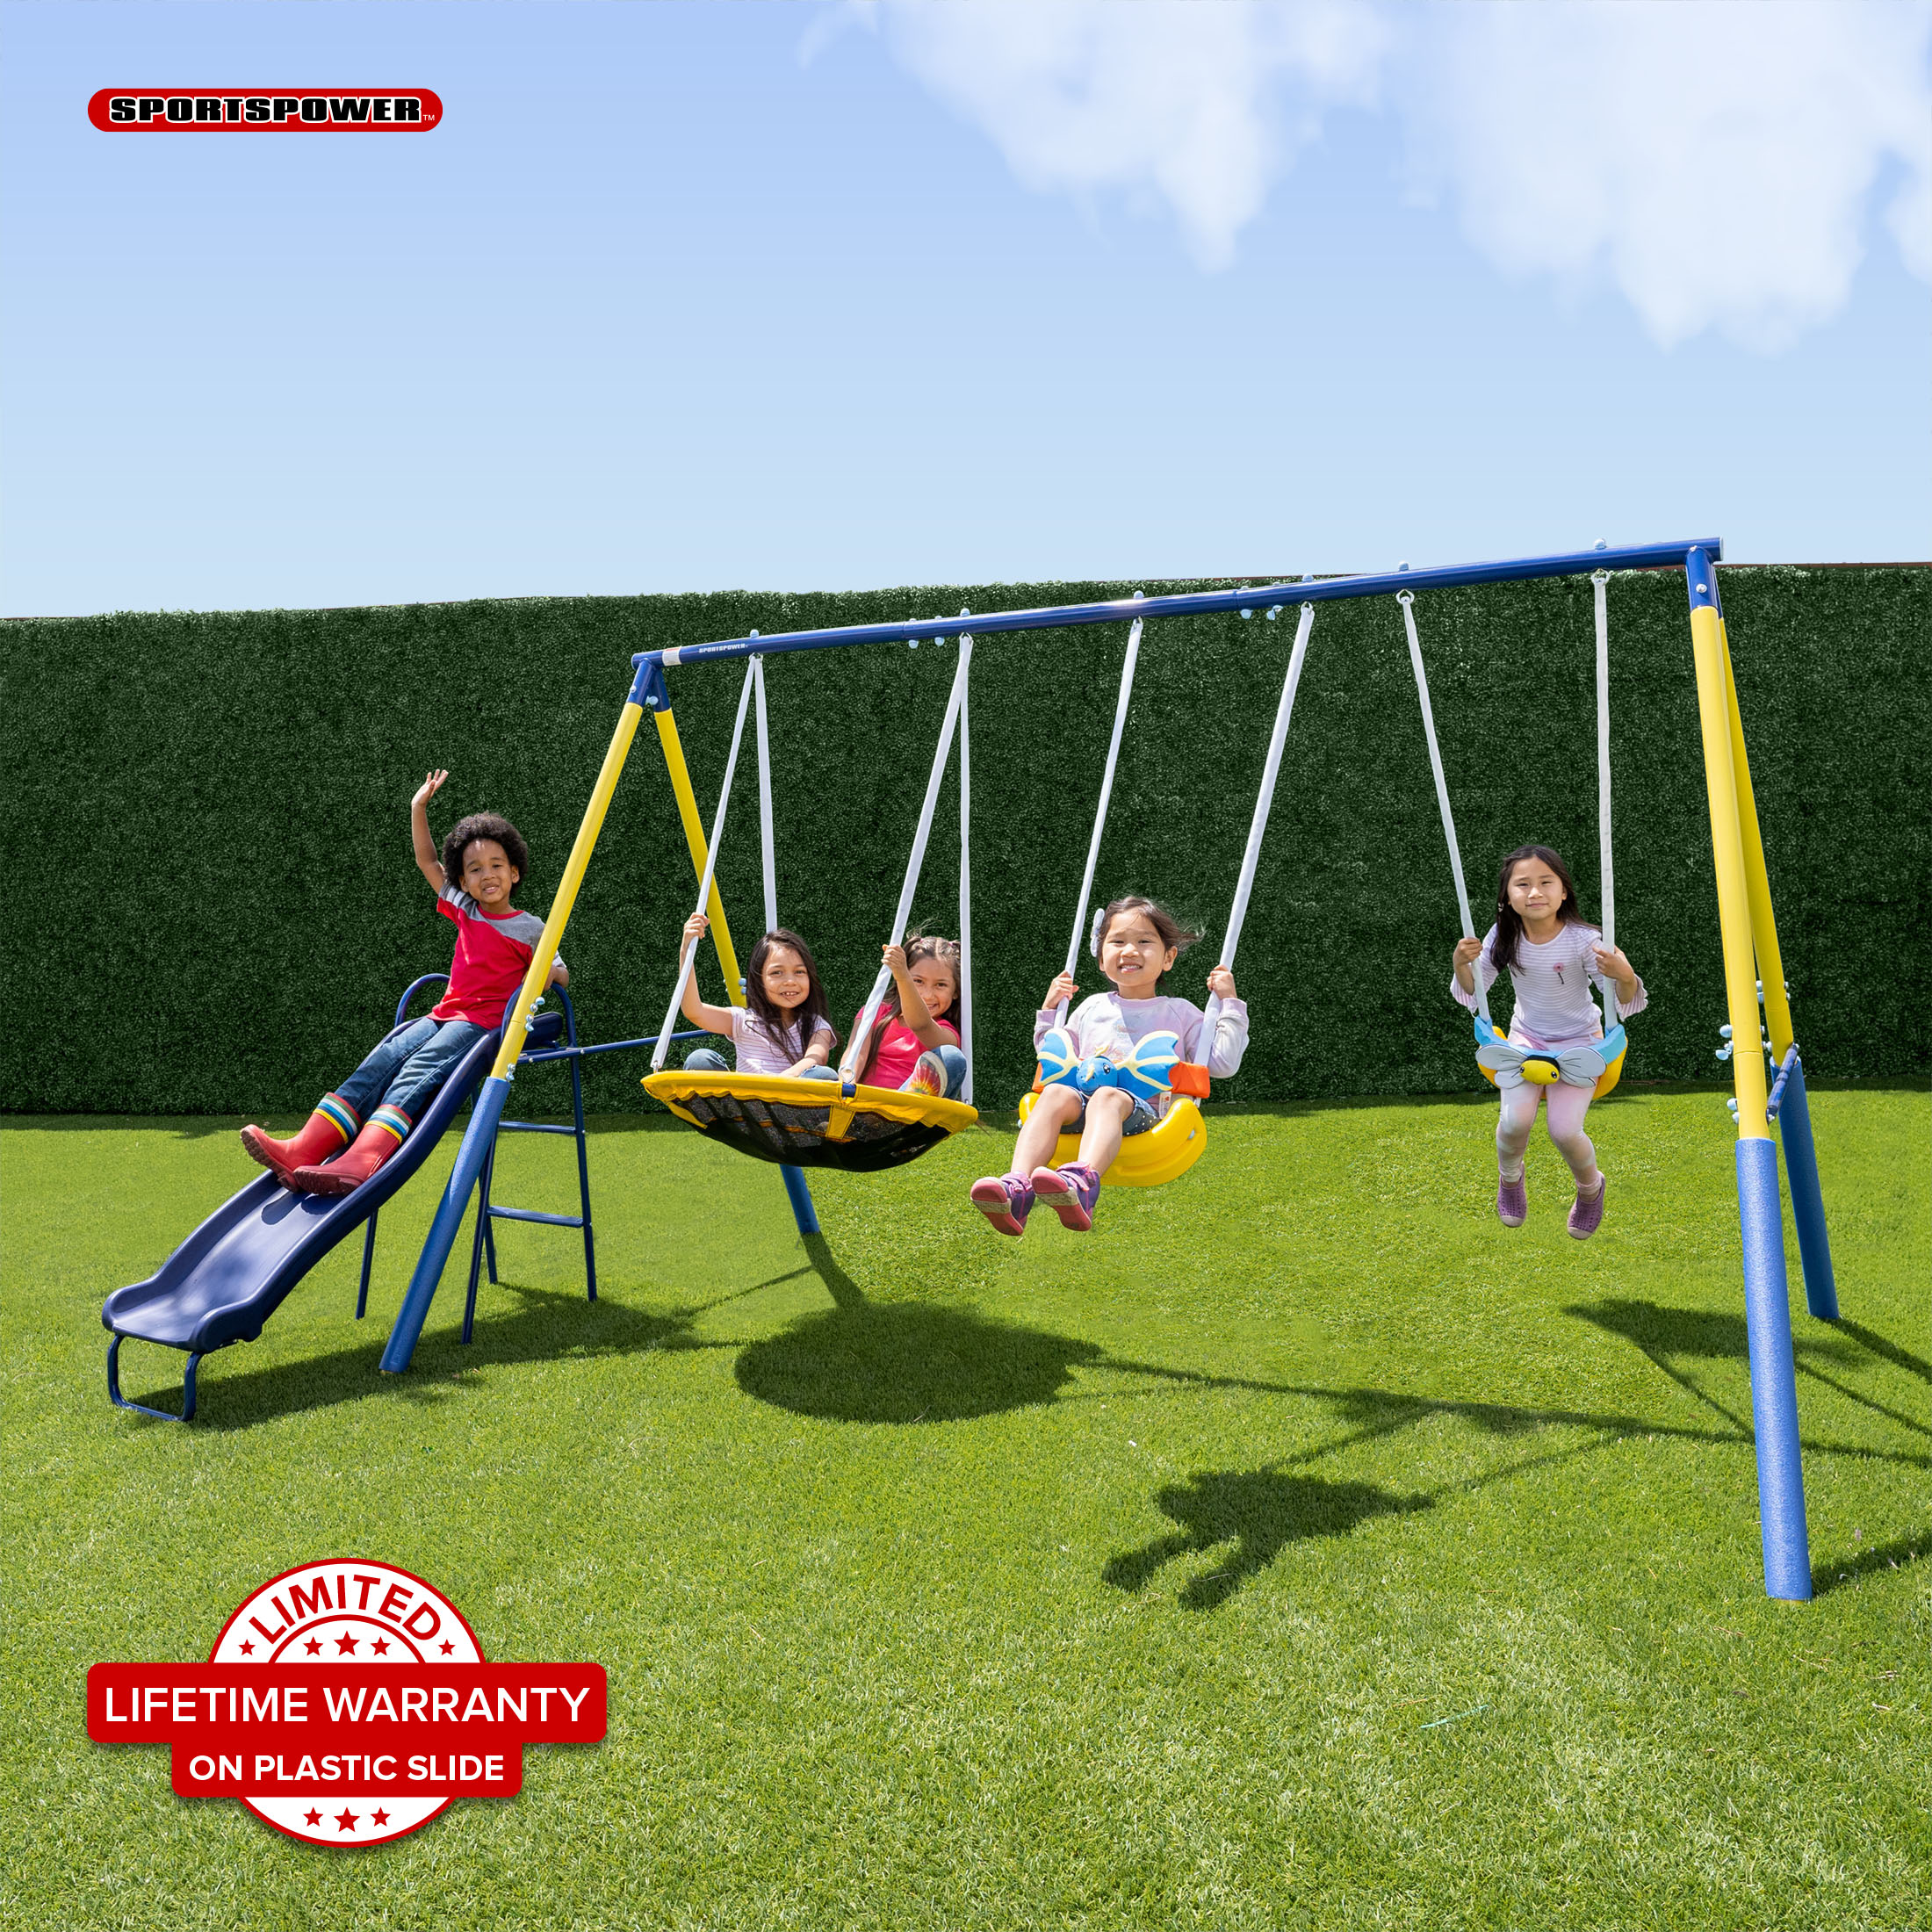 Sportspower Super Flyer Swing Set with 2 Flying Buddies, Saucer Swing, 2 Swings, and Lifetime Warranty on Blow Molded Slide - image 1 of 14